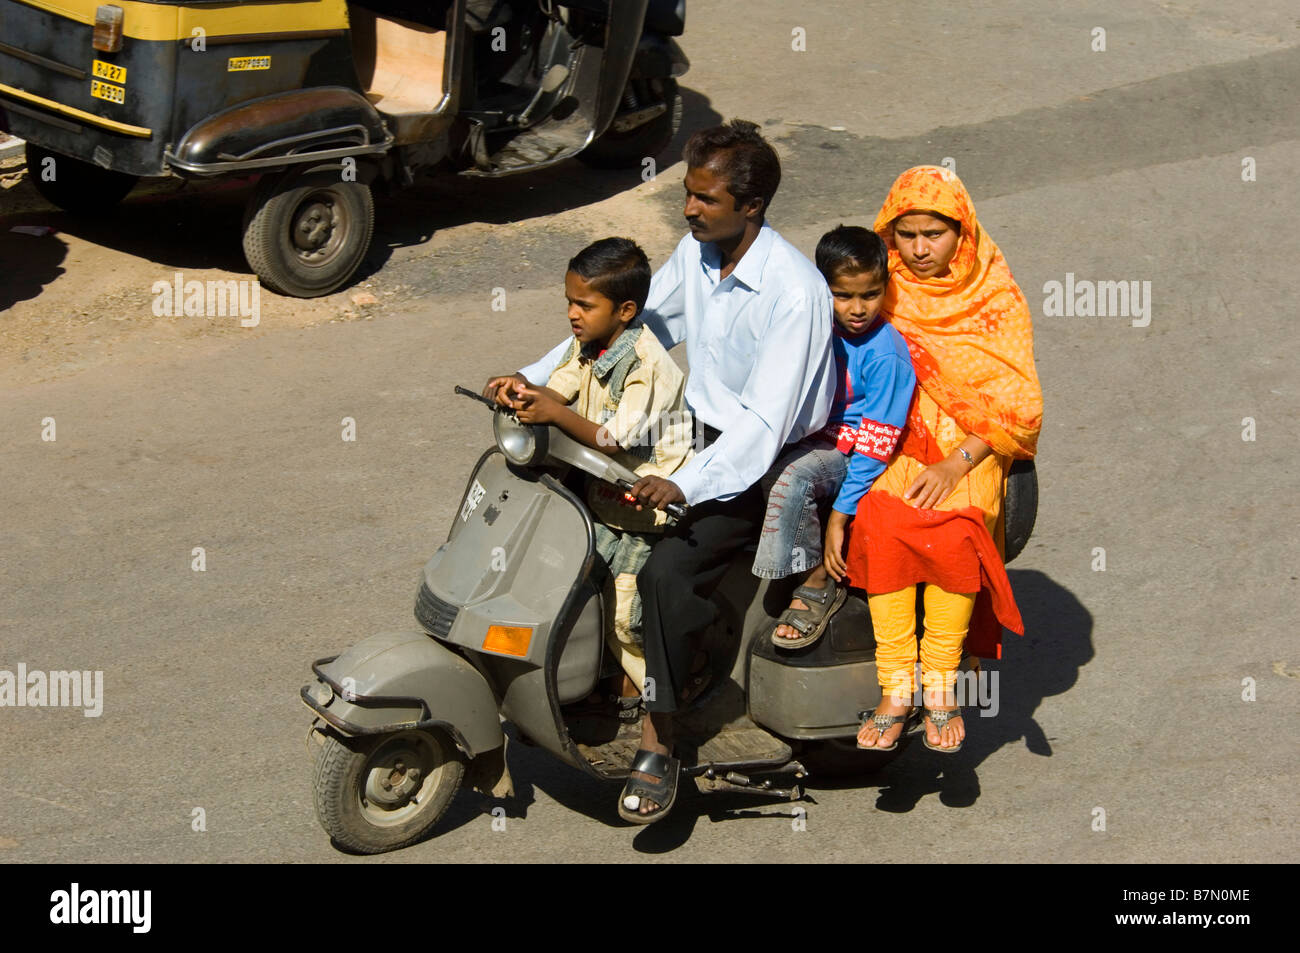 A Rajasthani family of four squashed together on a motor scooter with no crash helmets - a common sight in India. Stock Photo